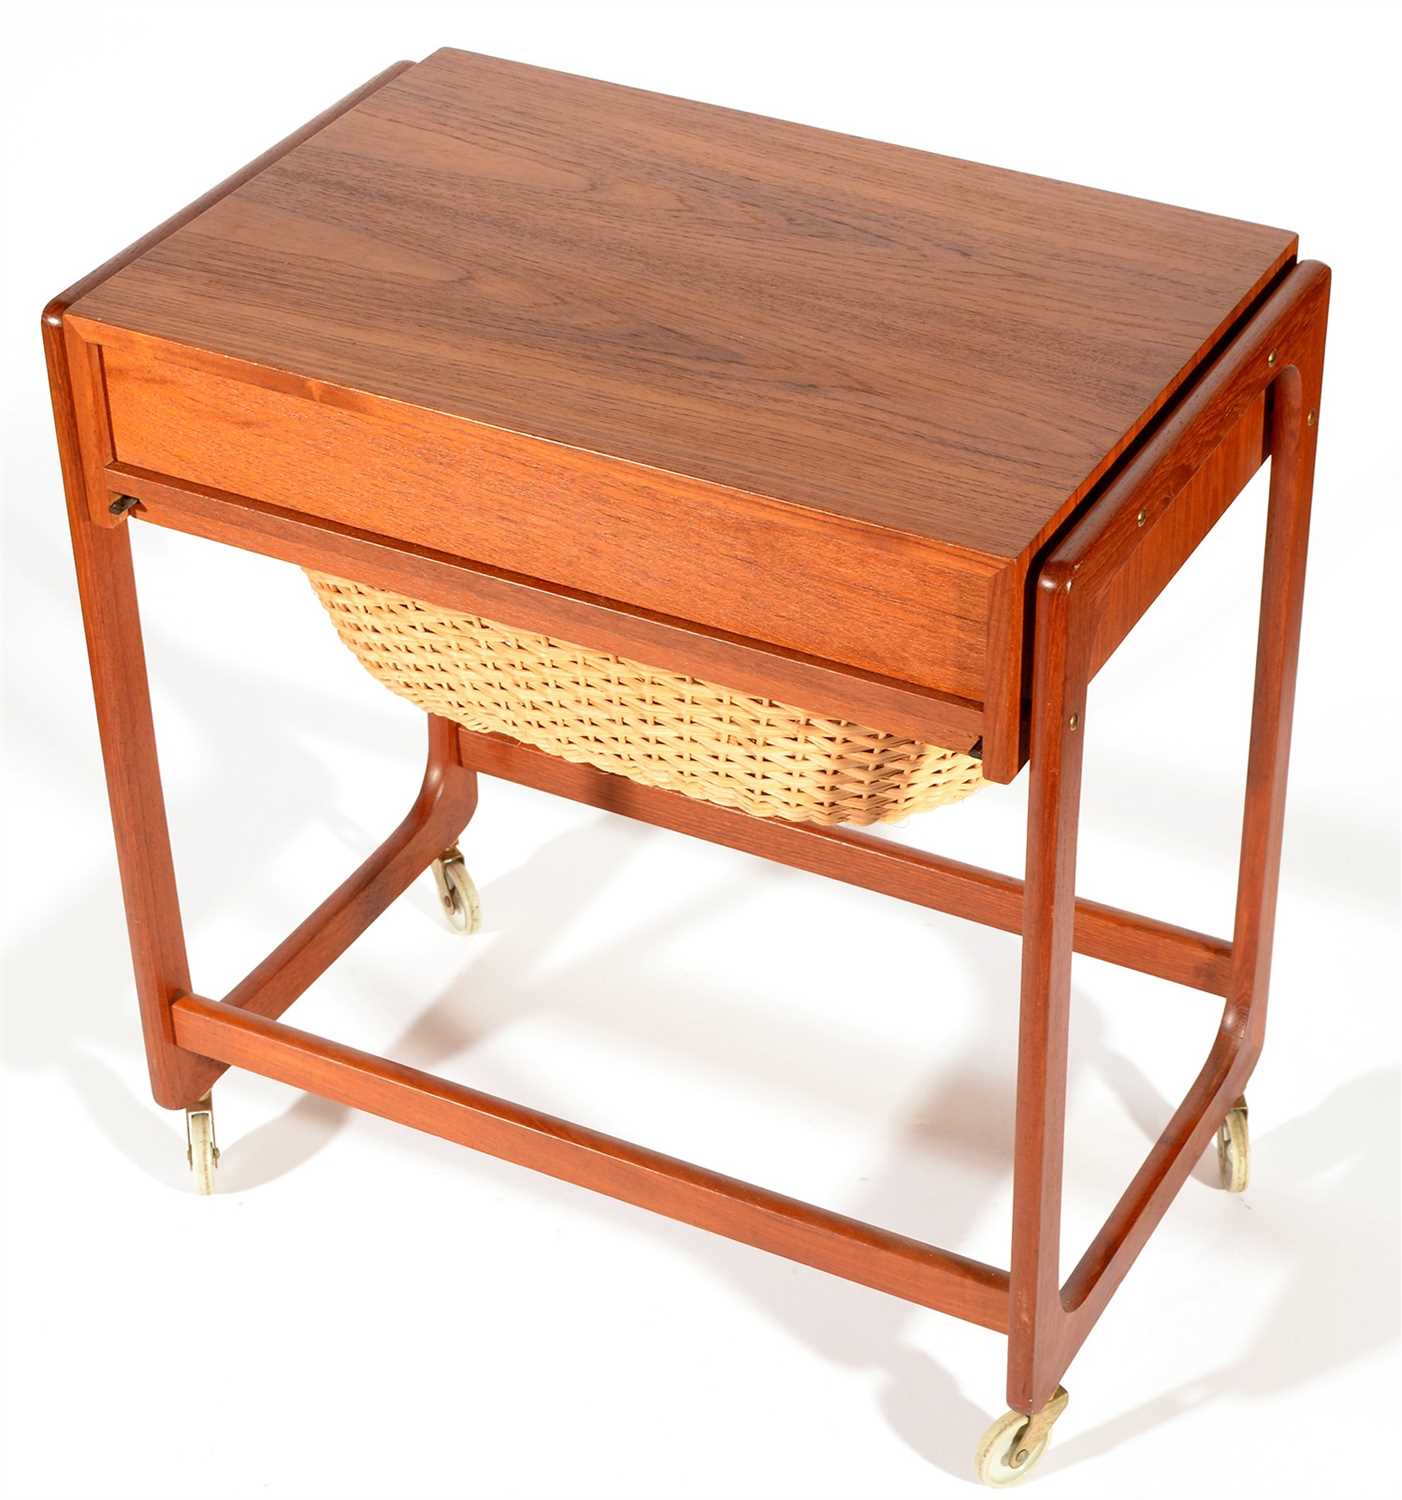 Lot 1564 - A BR Brink Mobler sewing box.